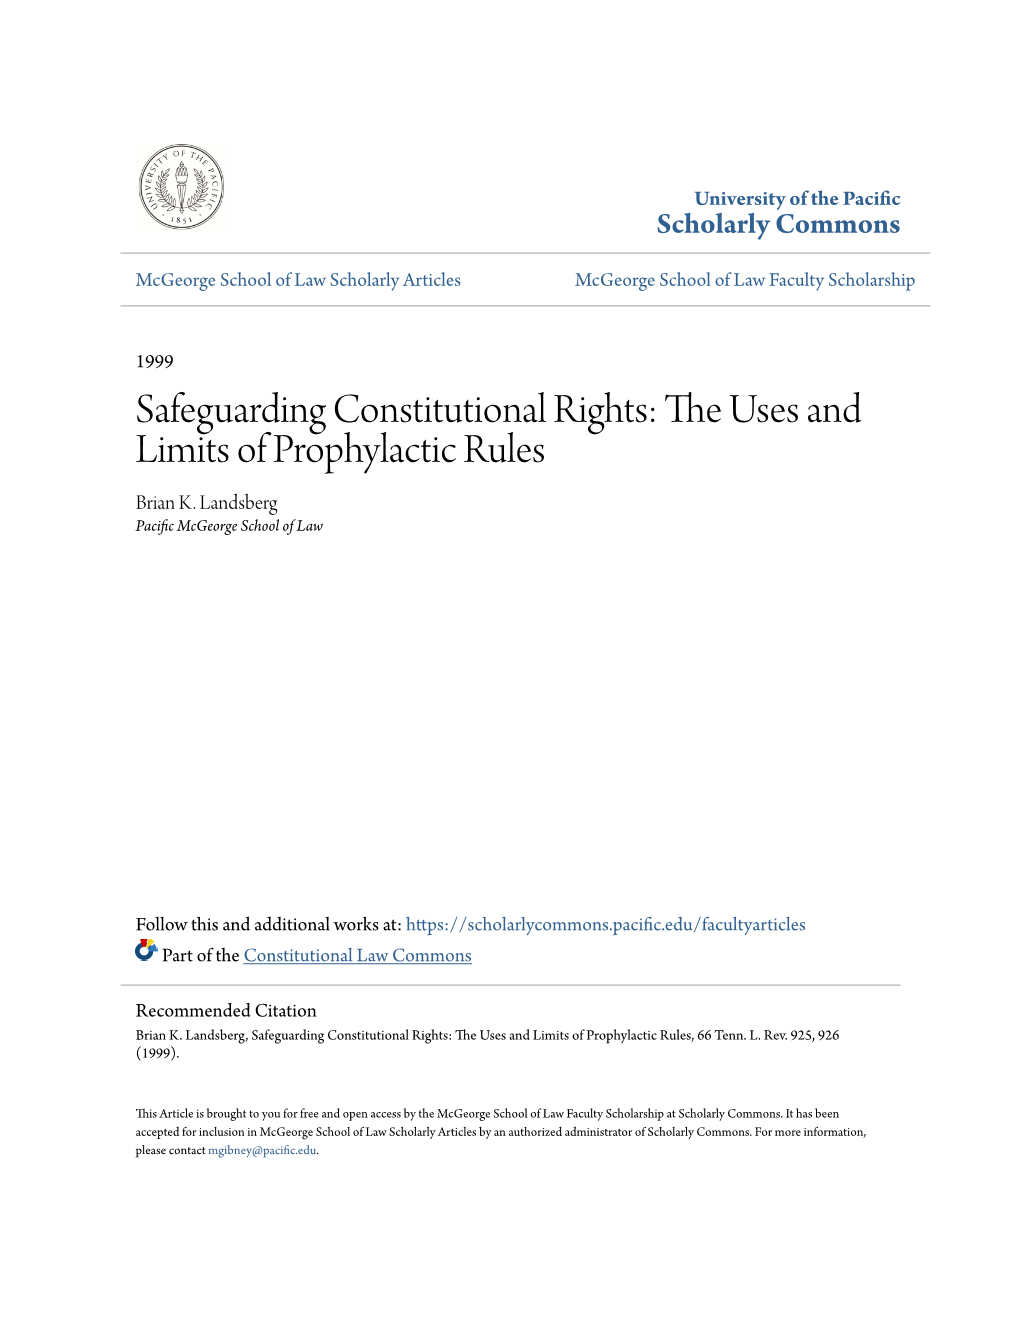 Safeguarding Constitutional Rights: the Uses and Limits of Prophylactic Rules